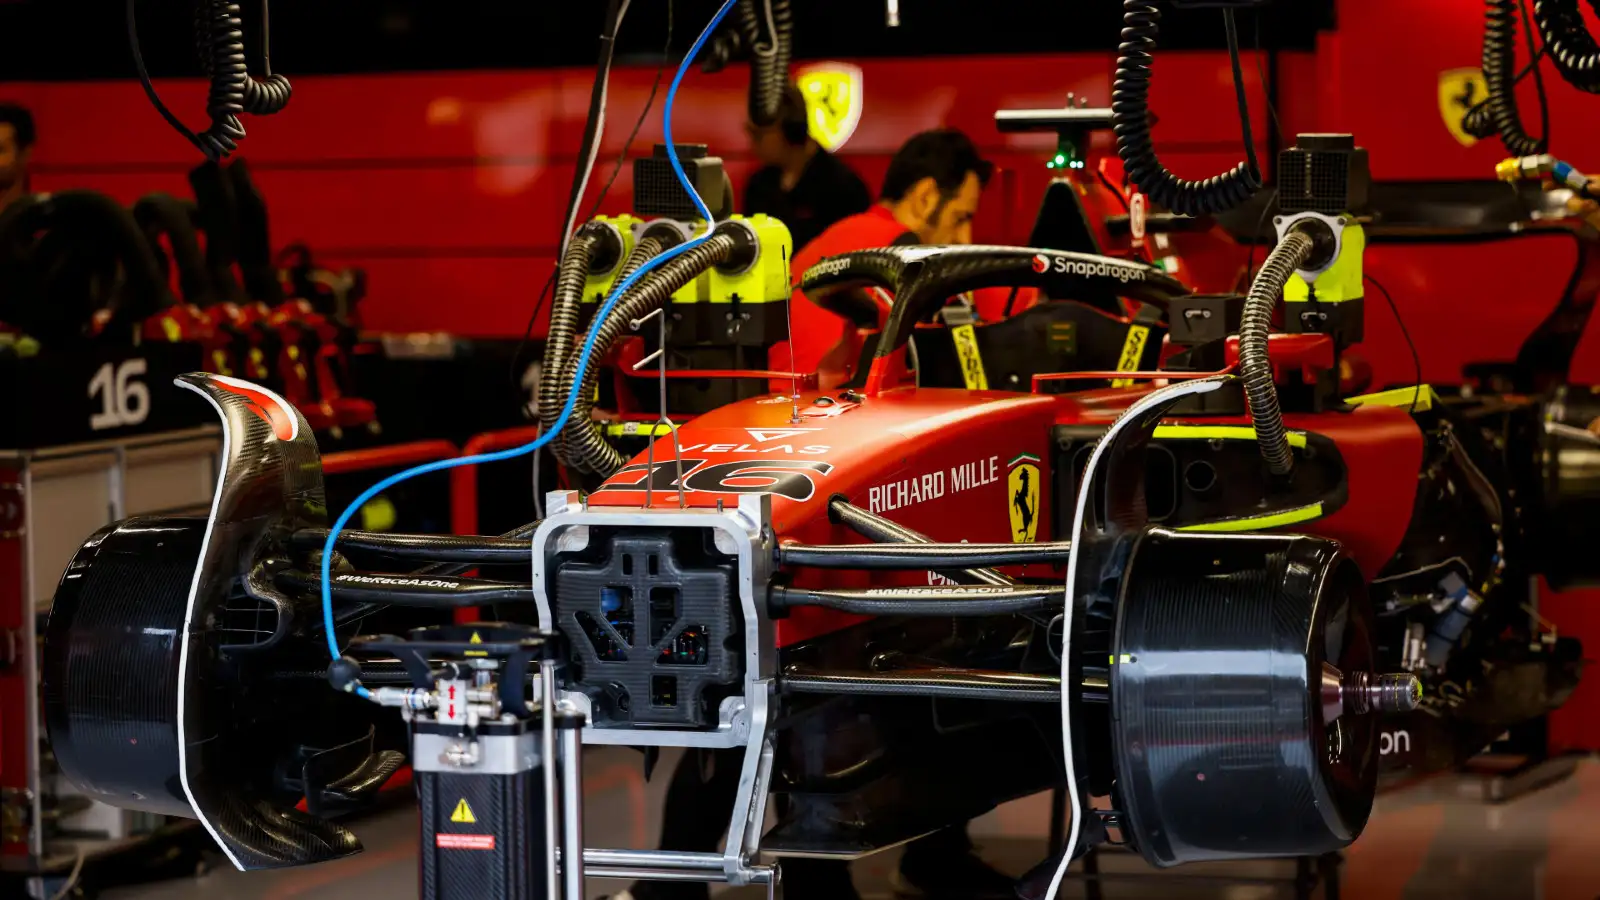 Ferrari's Charles Leclerc's car in pieces in the garage. Spa-Francorchamps, August 2022.